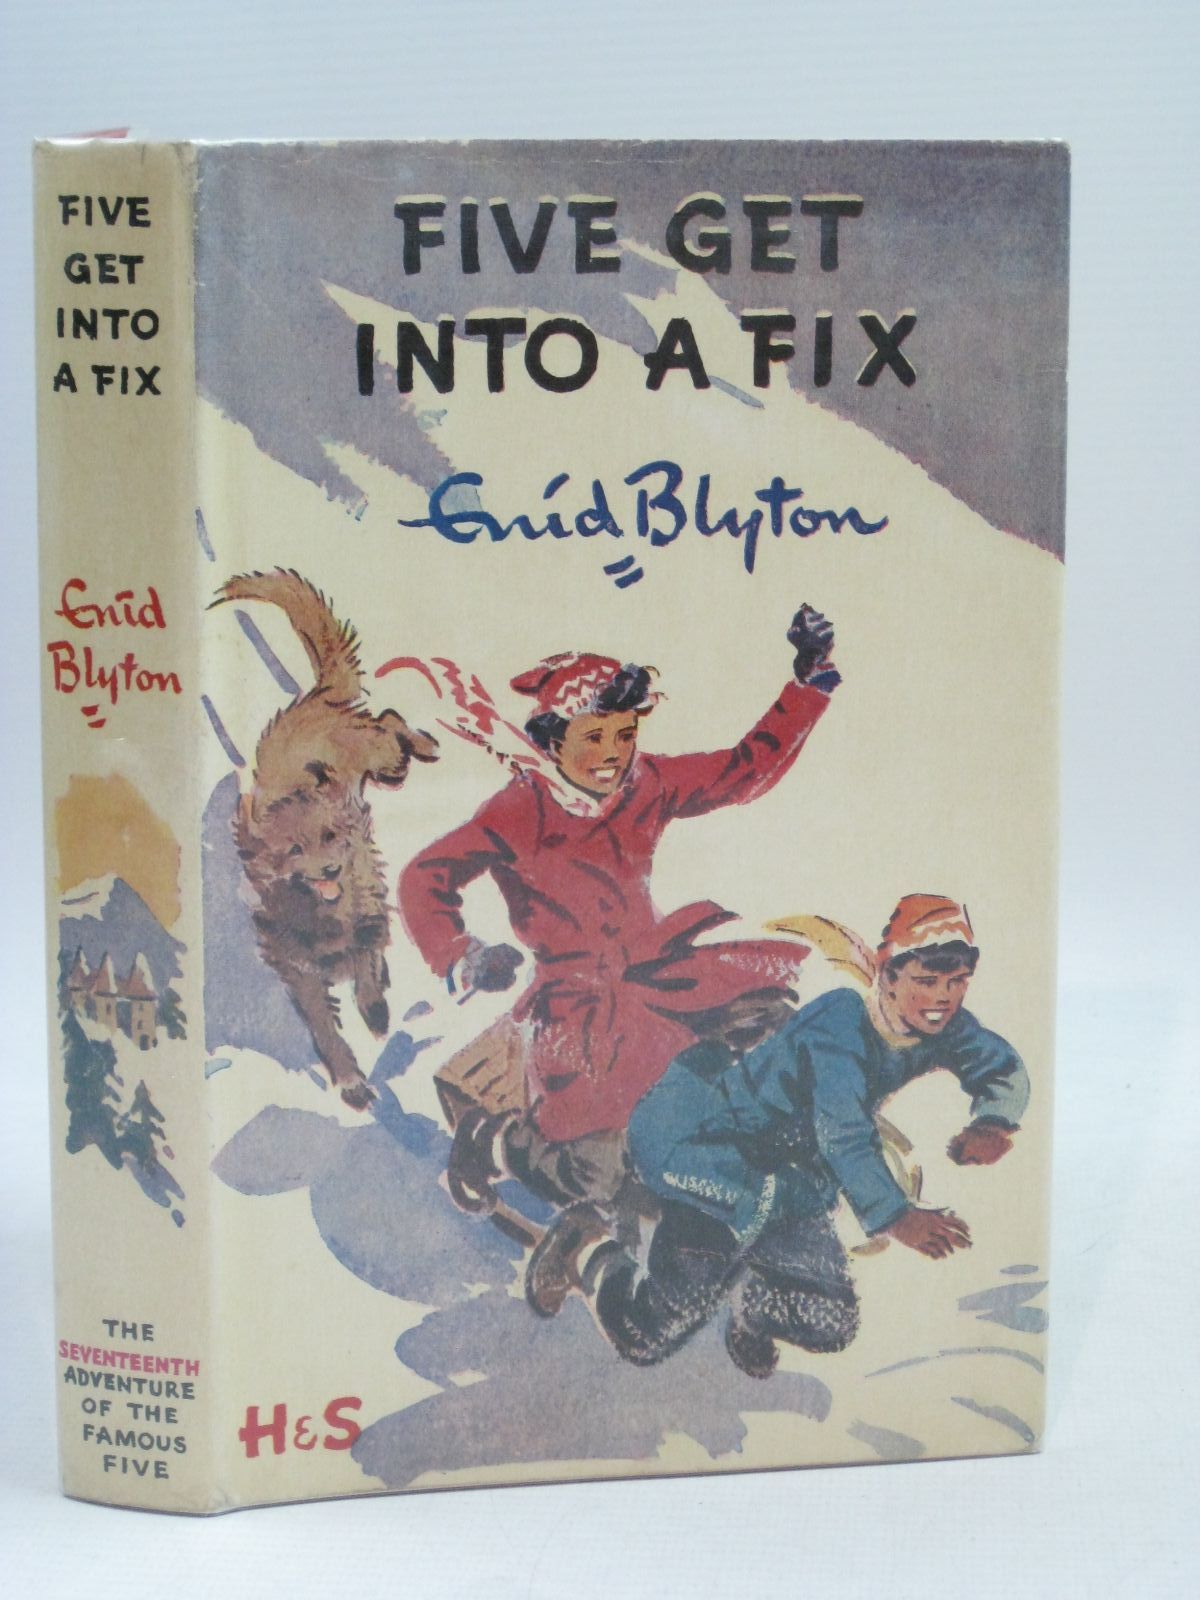 Cover of FIVE GET INTO A FIX by Enid Blyton